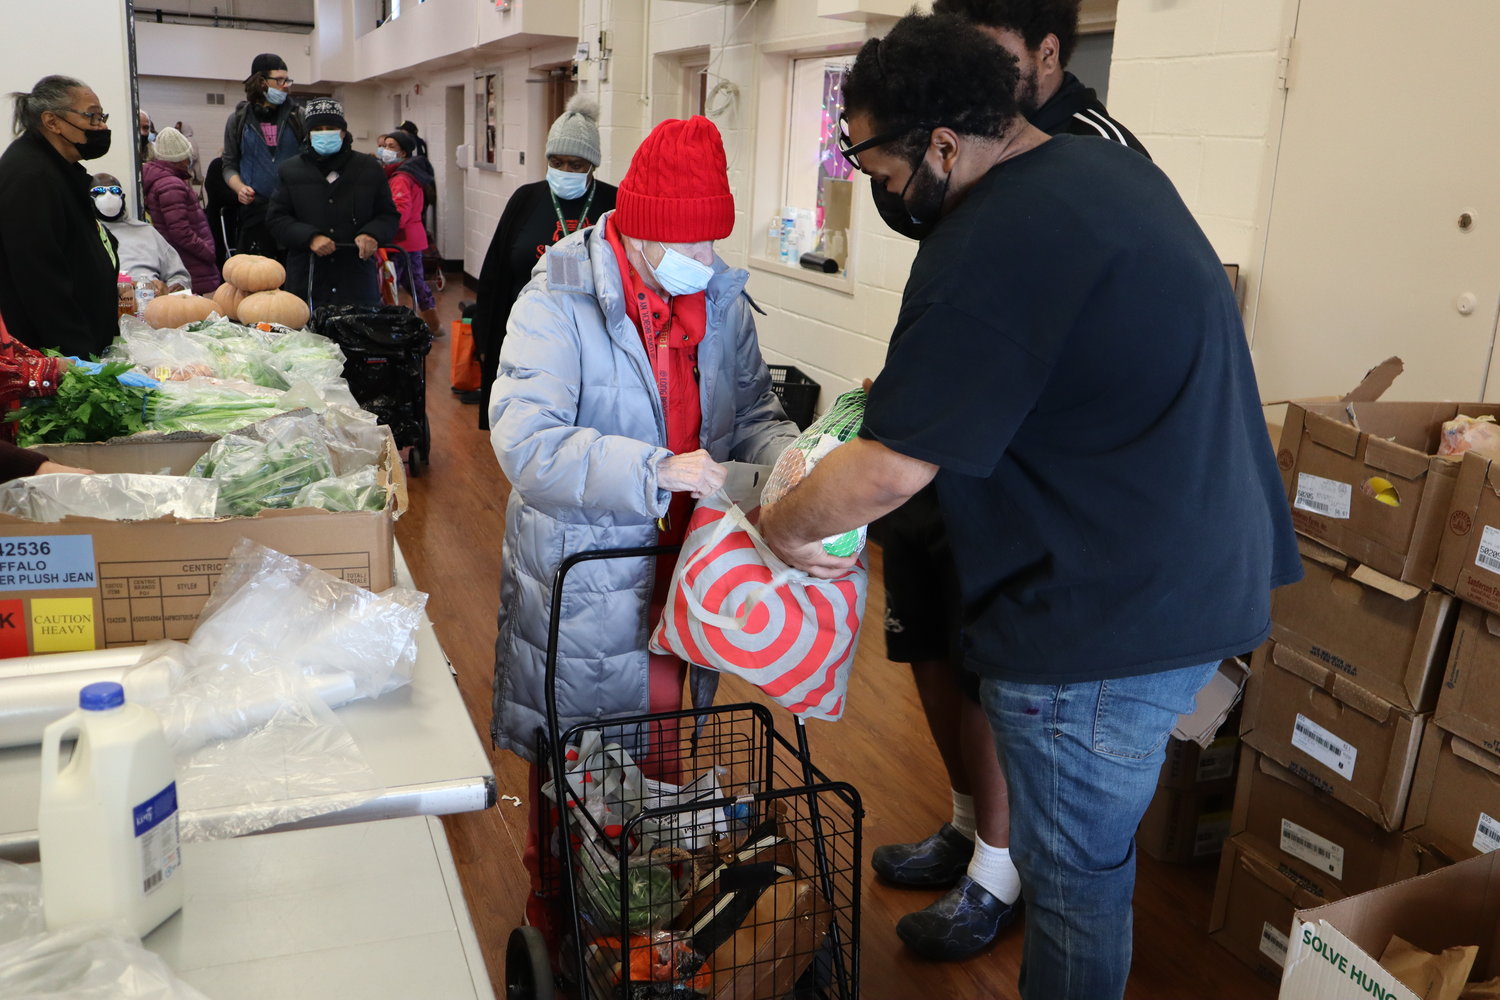 De’Juan Bacchas, 30, right, handed out turkeys and chickens donated by Island Harvest to patrons at the Dr. Martin Luther King Jr. Community Center food pantry on Friday, Nov. 18.